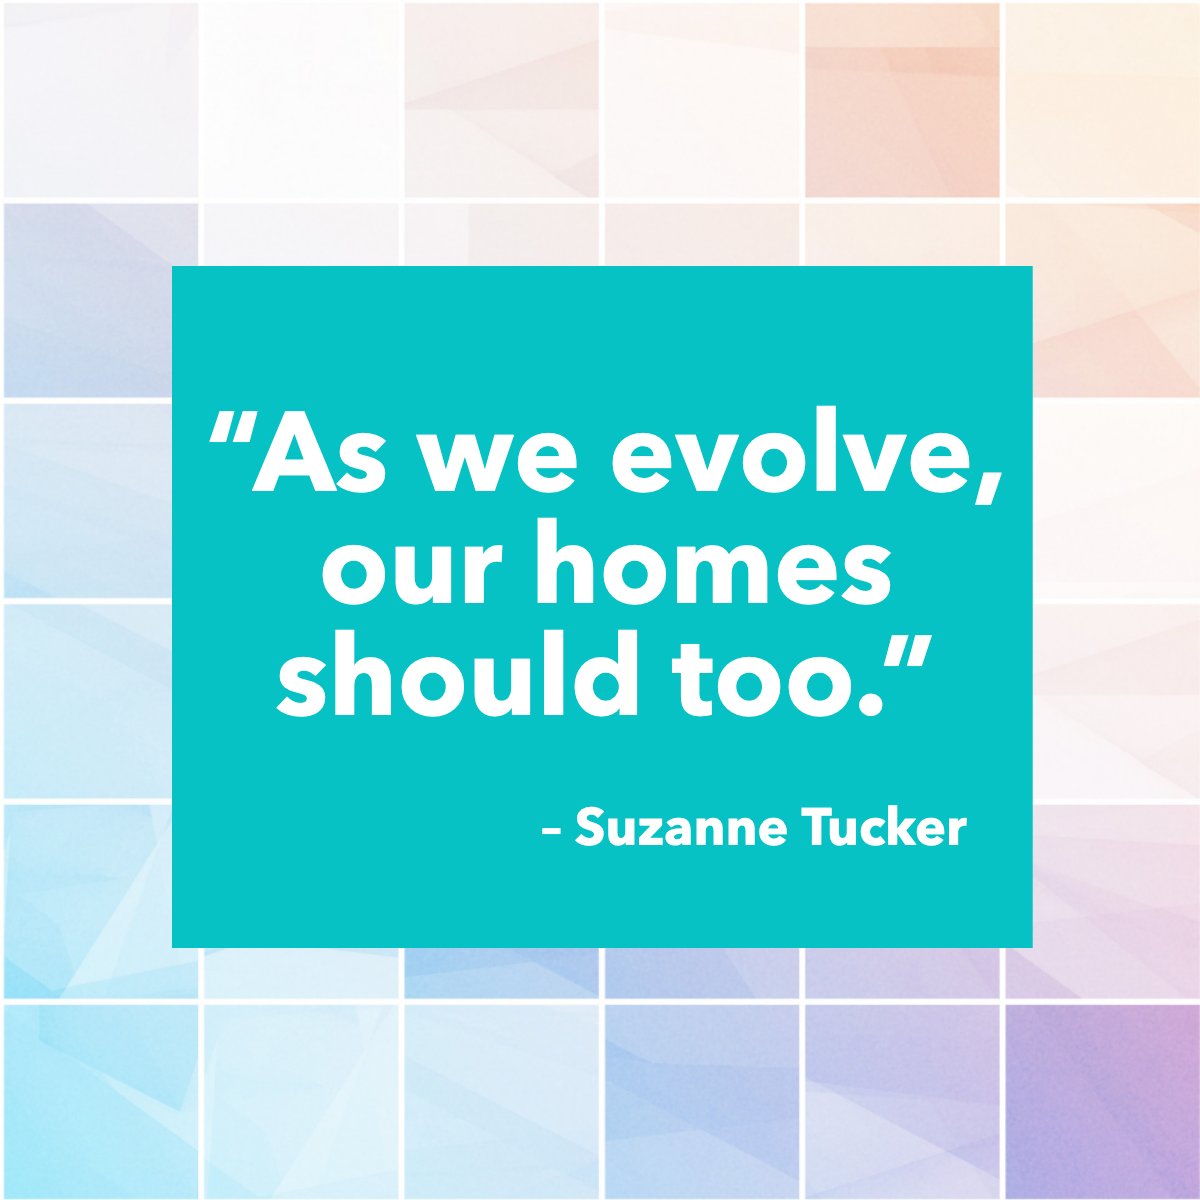 'As we evolve, our homes should too.' 
― Suzanne Tucker 📖

 #quoteoftheday    #realestate    #realestatequotes    #quotefortoday    #SuzanneTucker
#myhousefl #realestate #Floridarealestate #sellyourhouse #buyyourhome #JoelSantos #MVPREALTY #LehighAcresFlorida